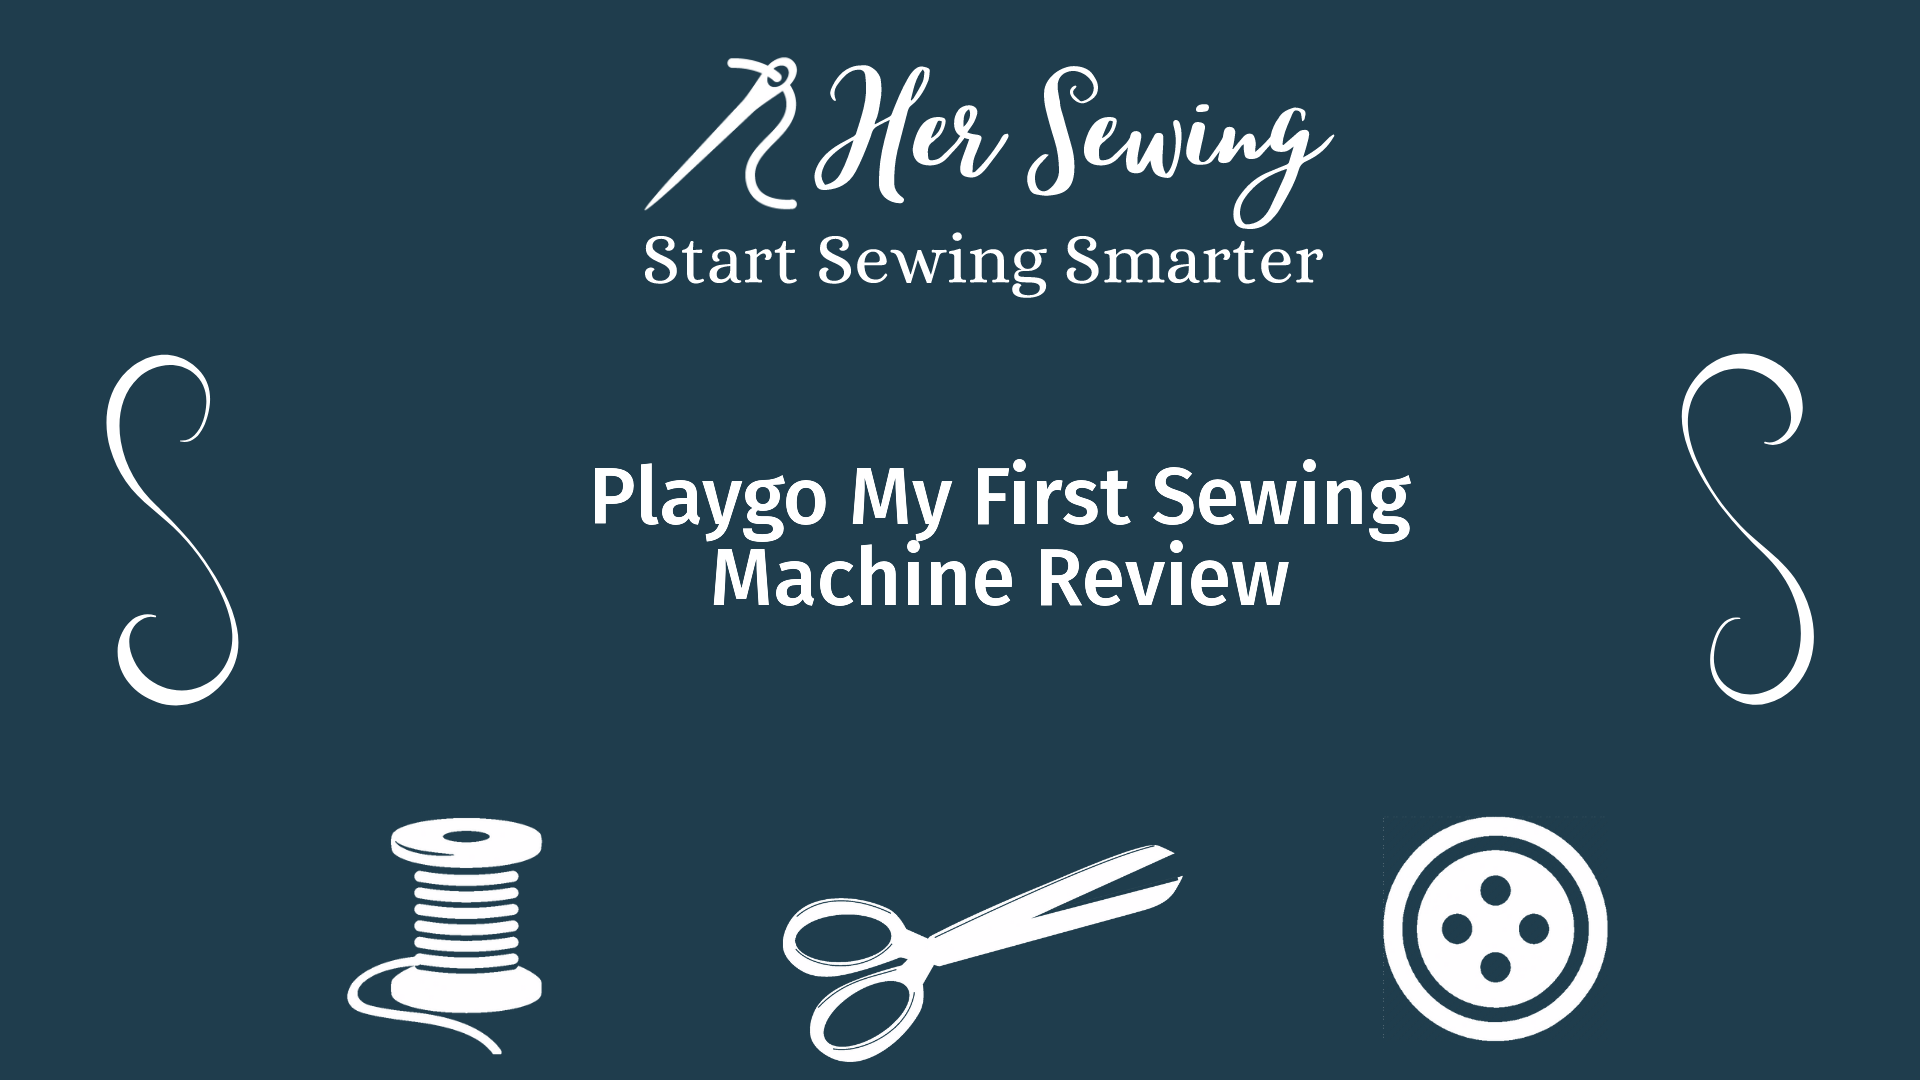 Playgo My First Sewing Machine Review